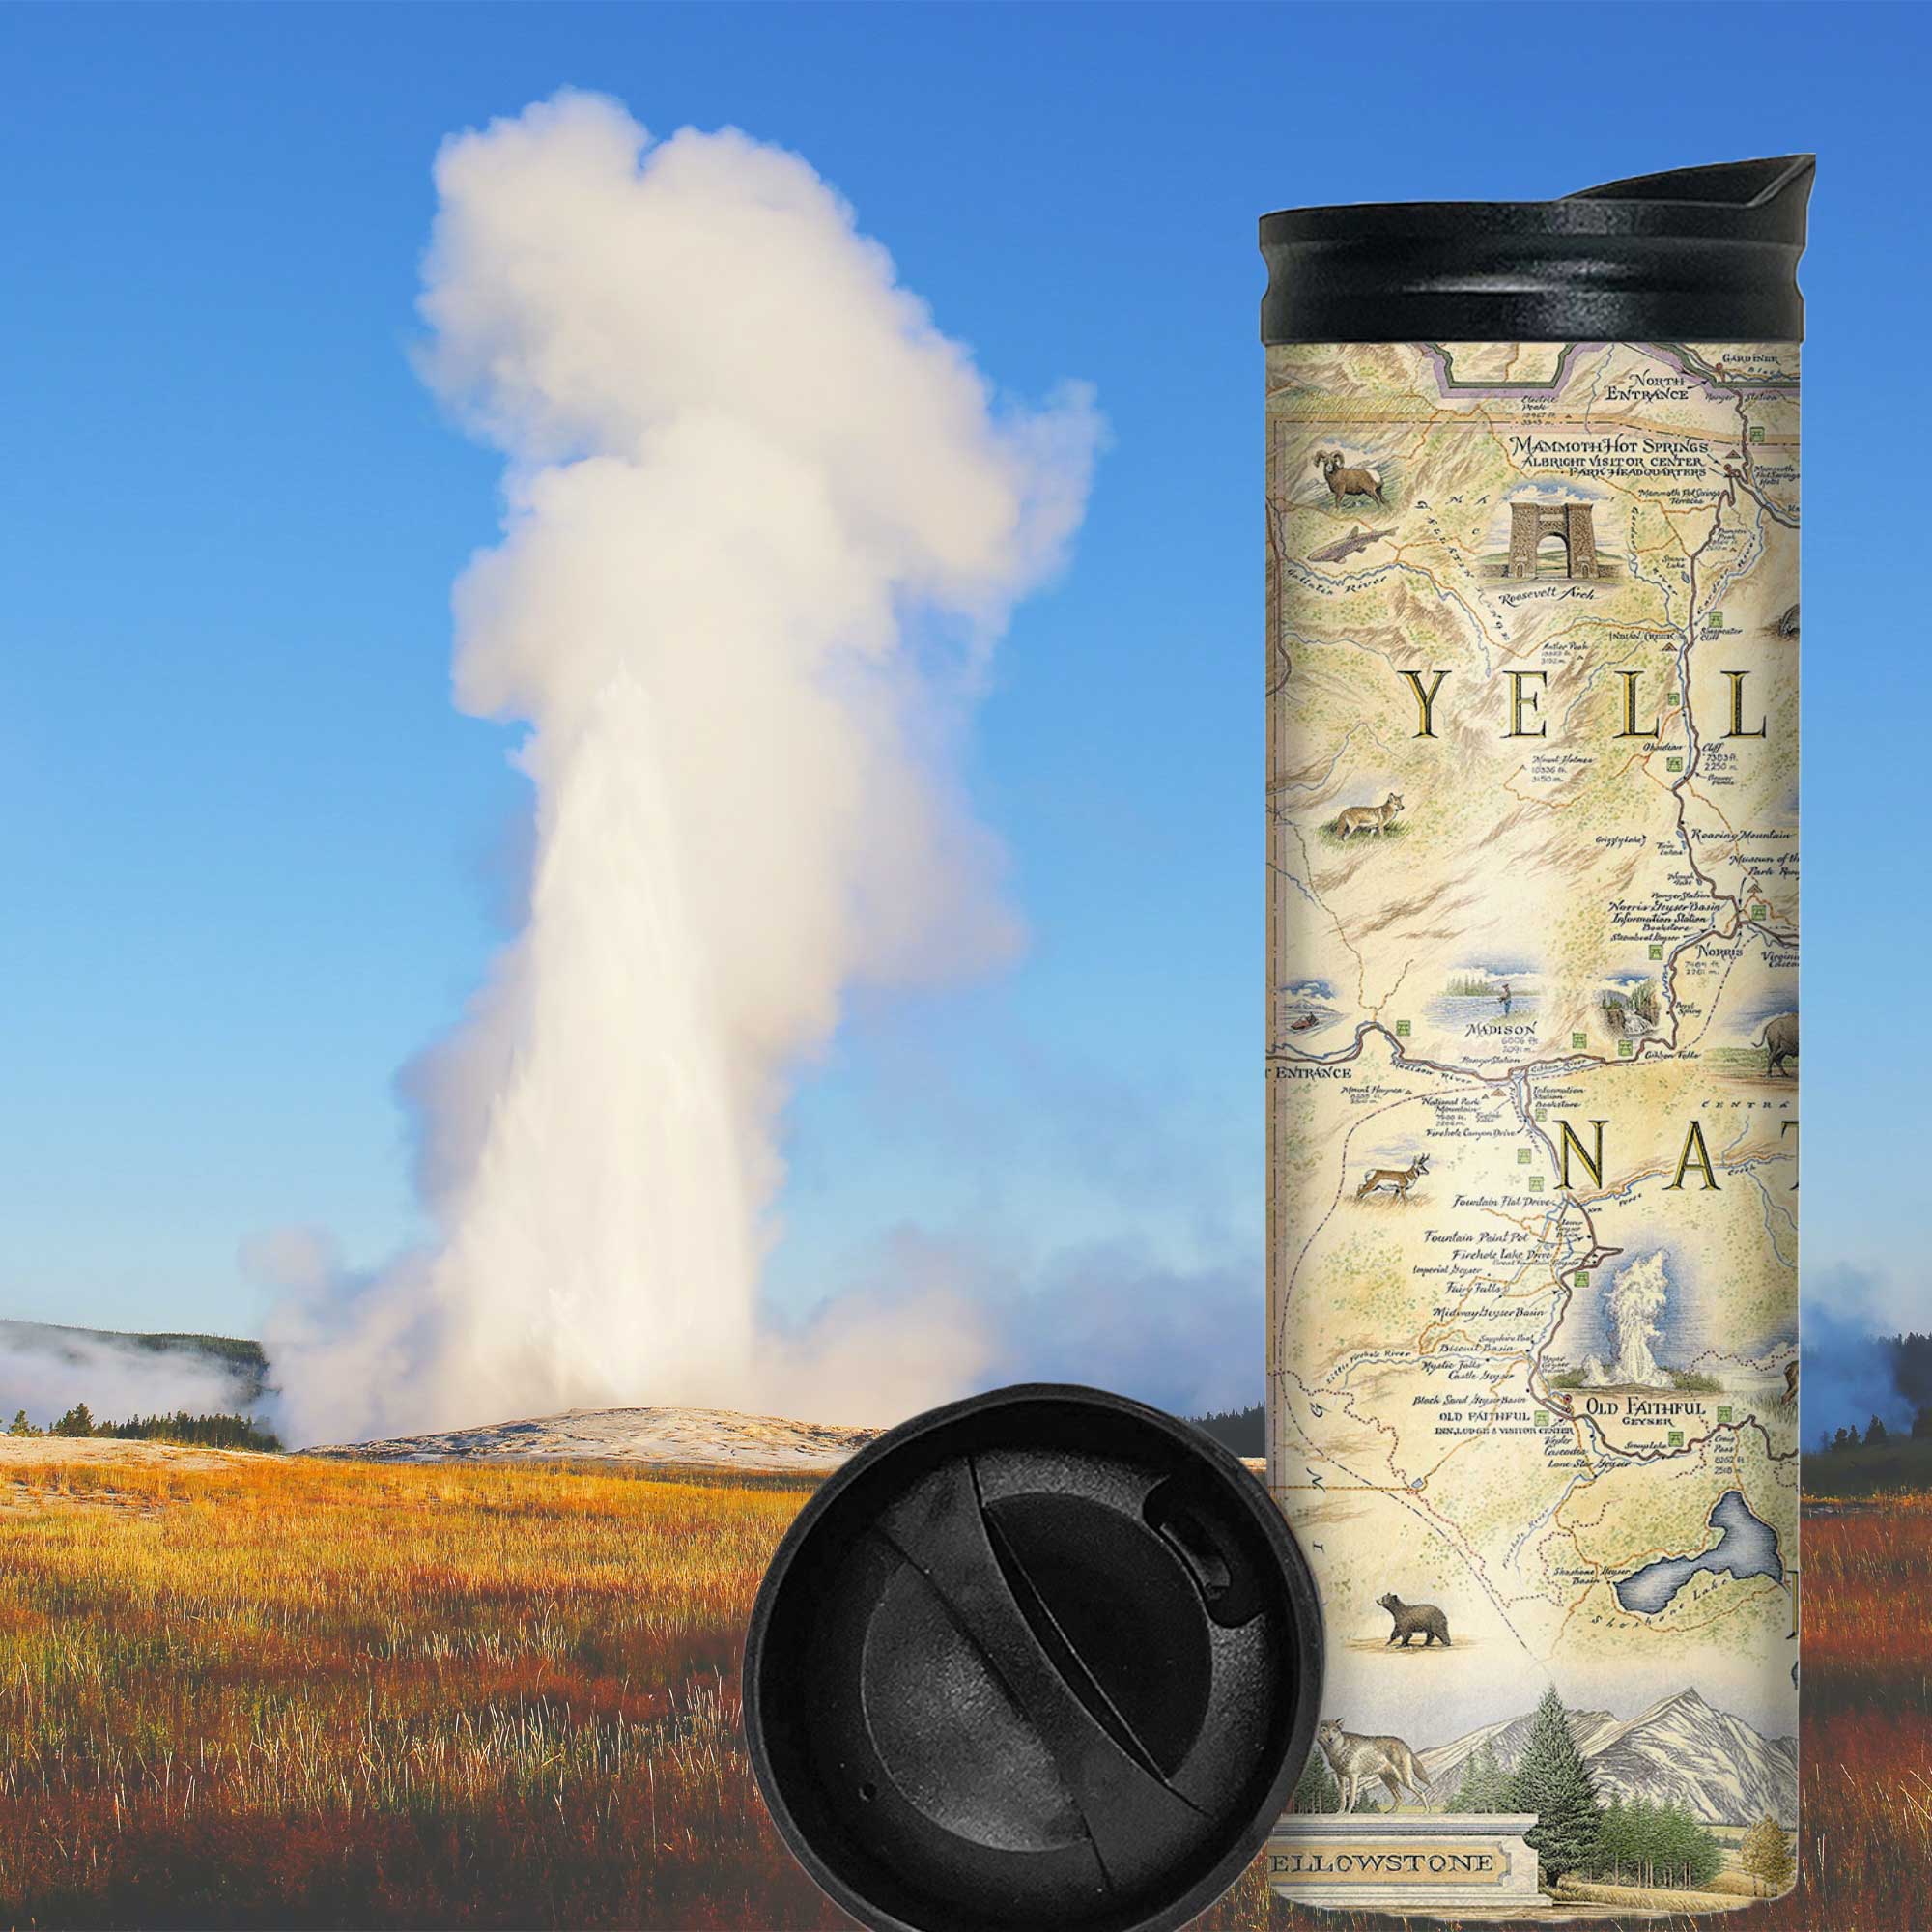 Yellowstone National Park Map Travel thermos mug in front of Old Faithful. Features illustrations of places such as Yellowstone Lake, Old Faithful, and Roosevelt Tower. Flora and fauna include mountain lions, world, grizzly bears, fireweed, and lupine.